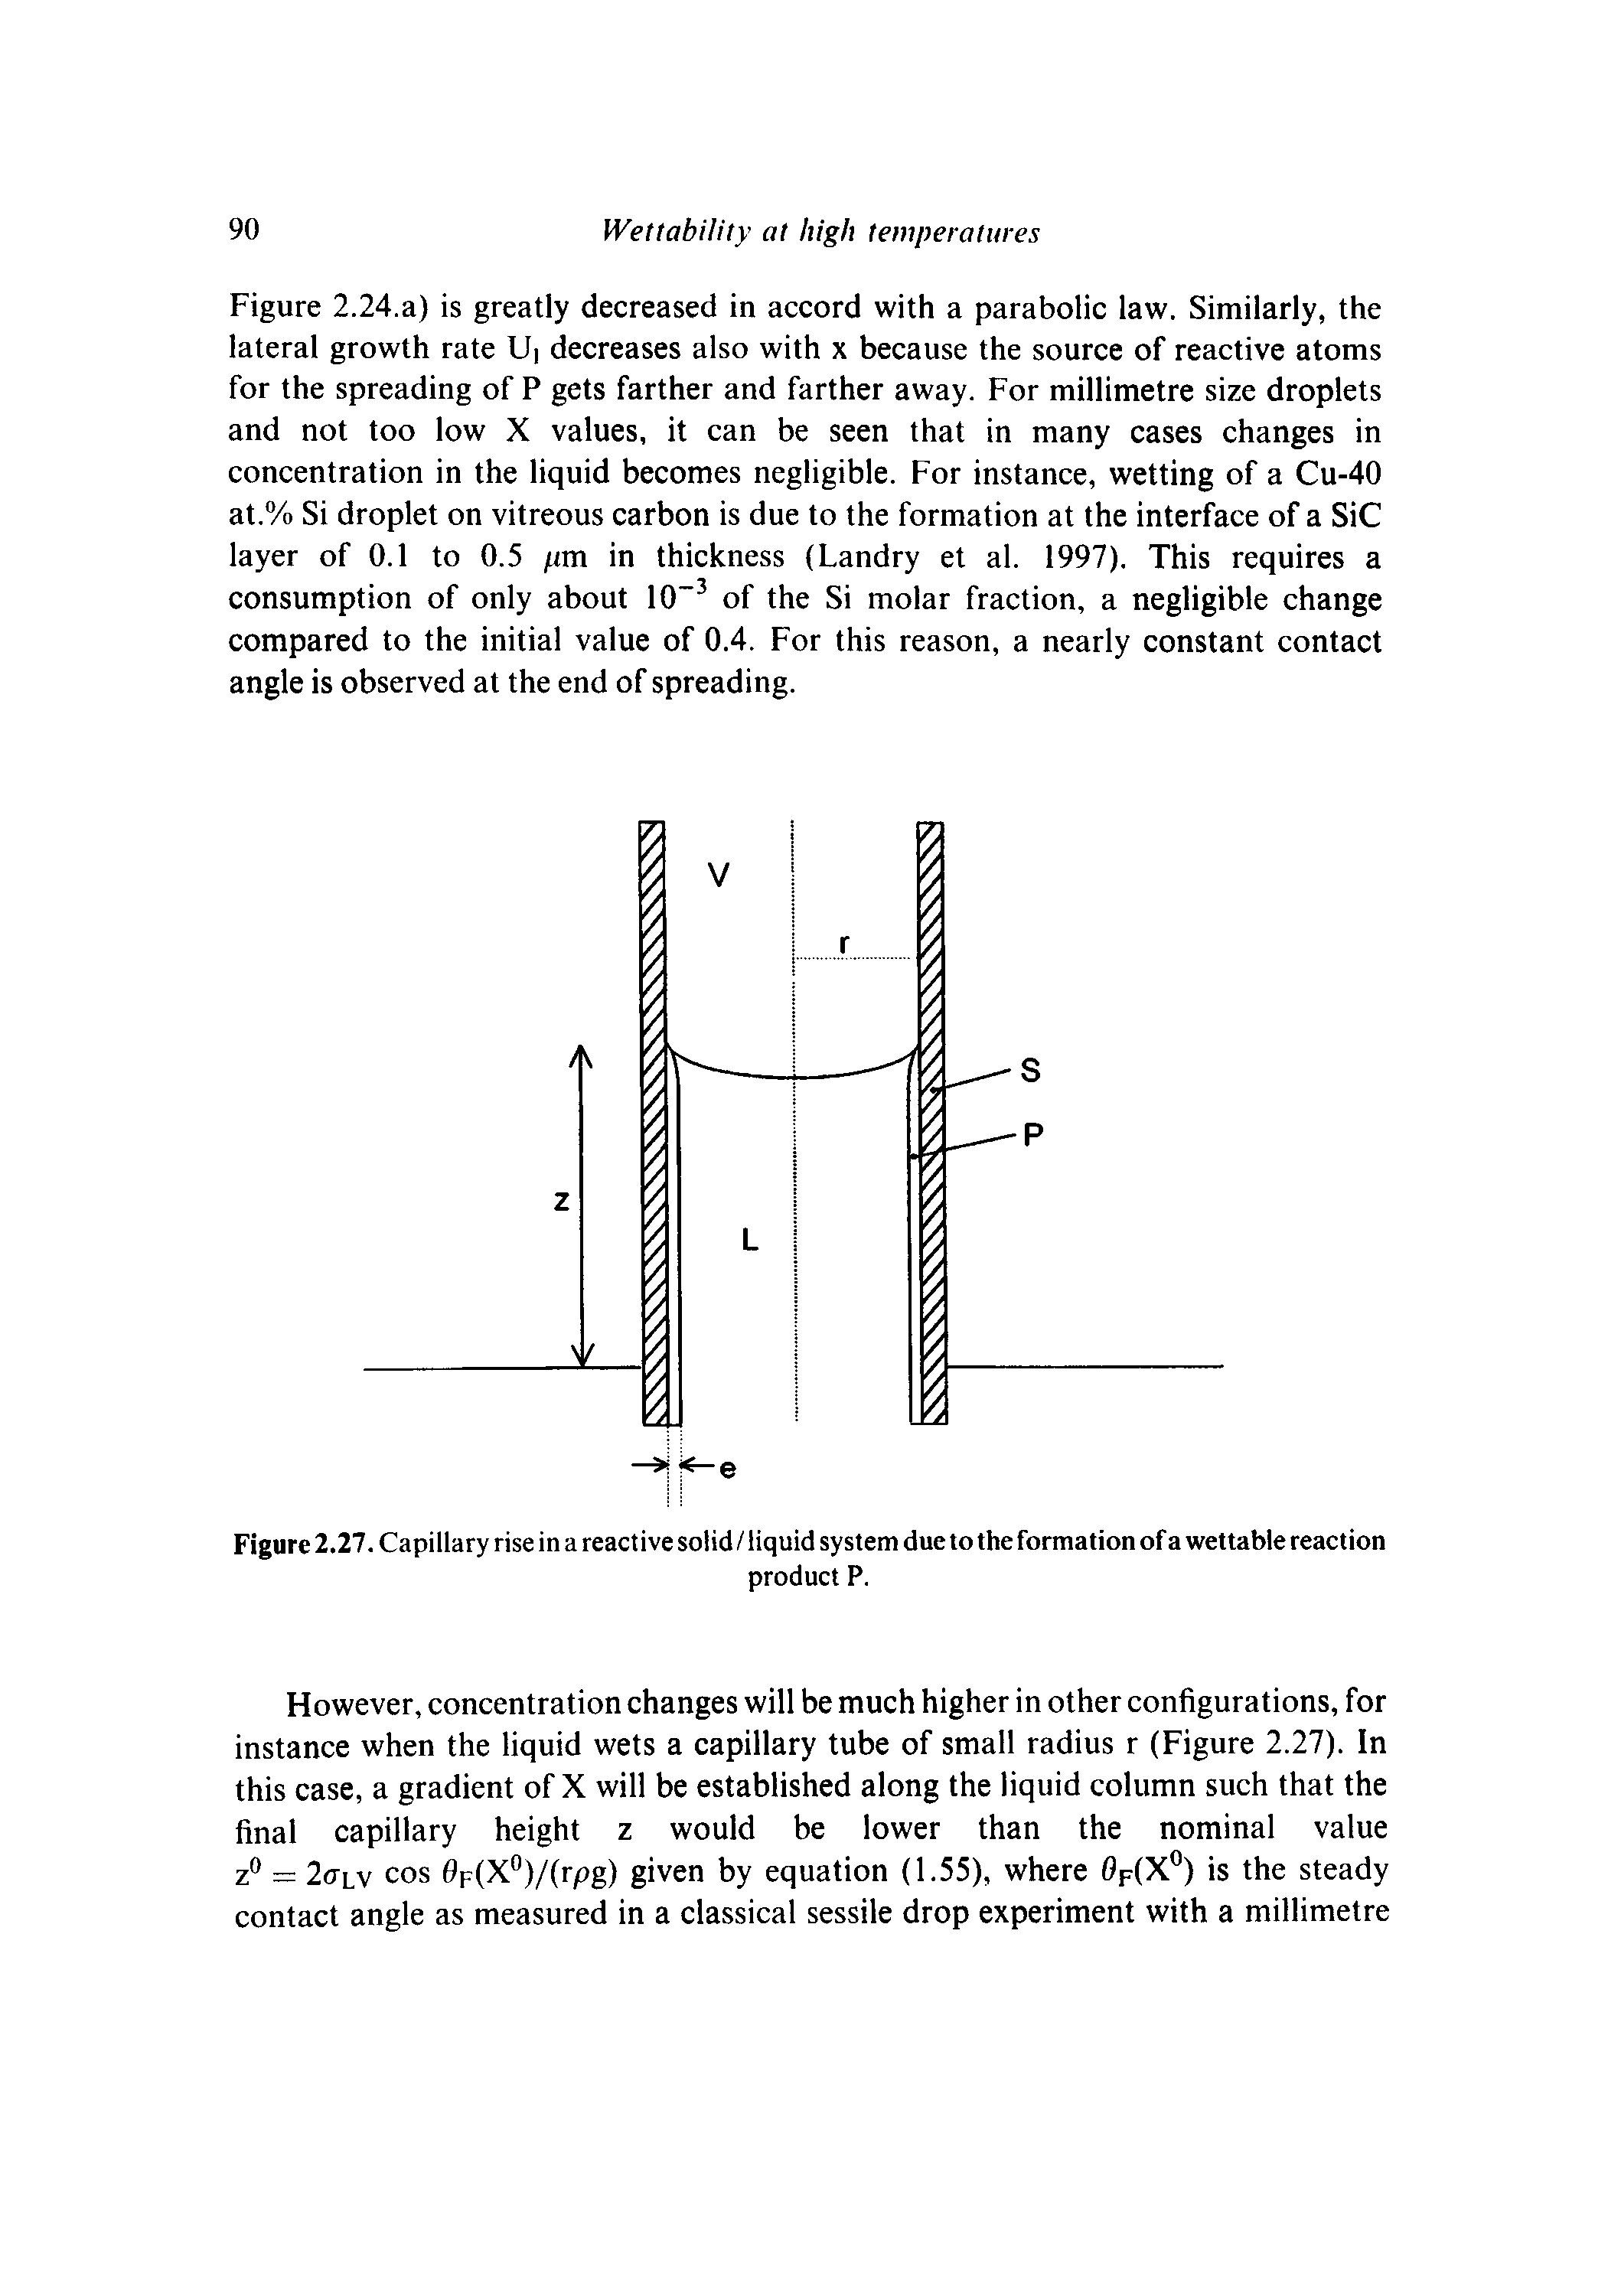 Figure 2.27. Capillary rise in a reactive solid / liquid system due to the formation of a wettable reaction...